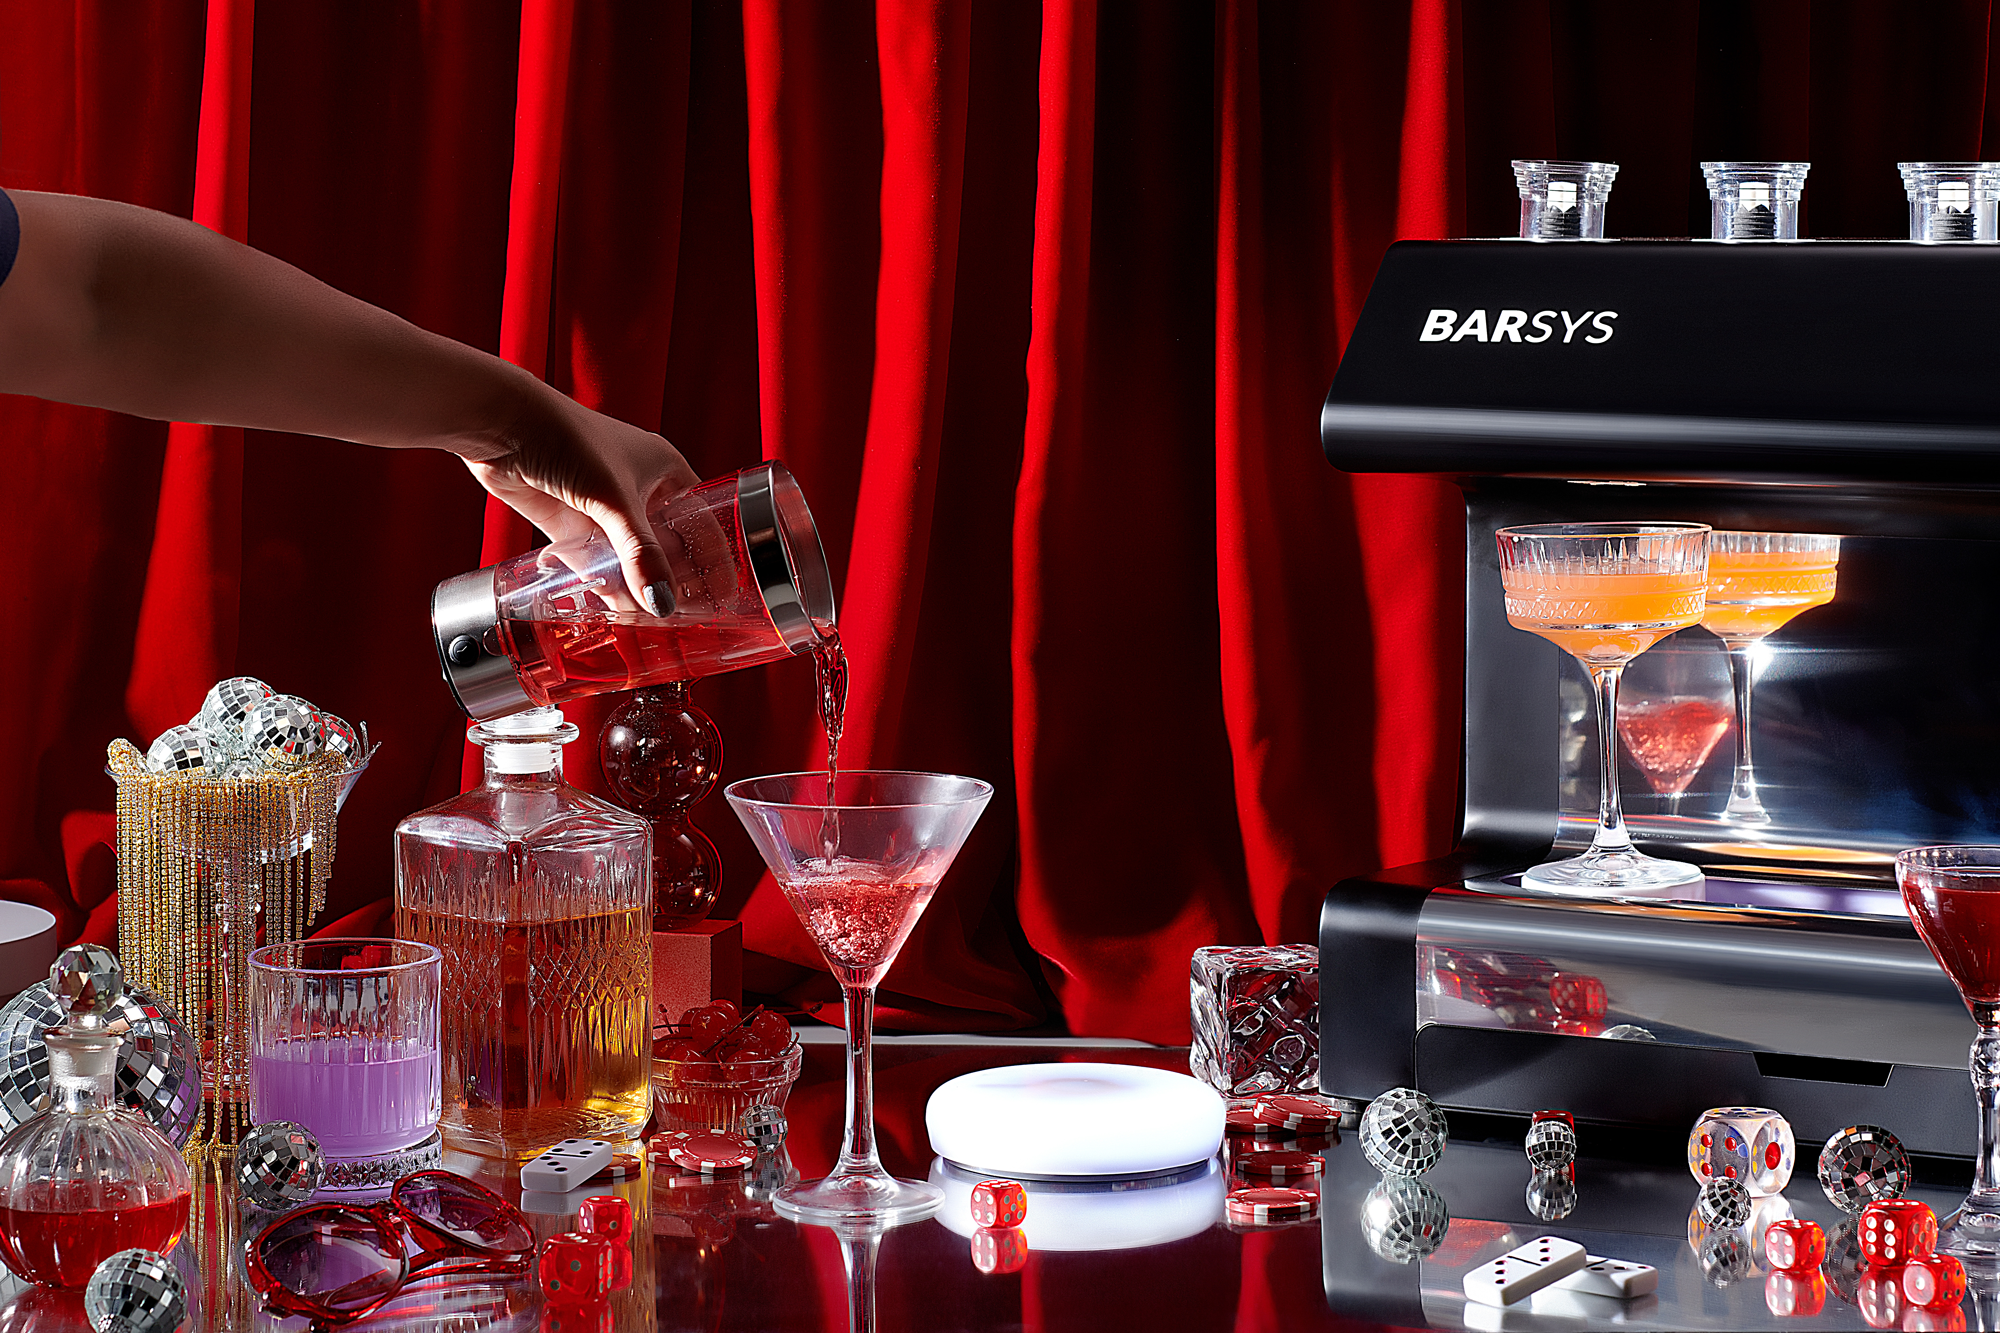 Barsys Automated Cocktail Maker review: A messy cocktail maker